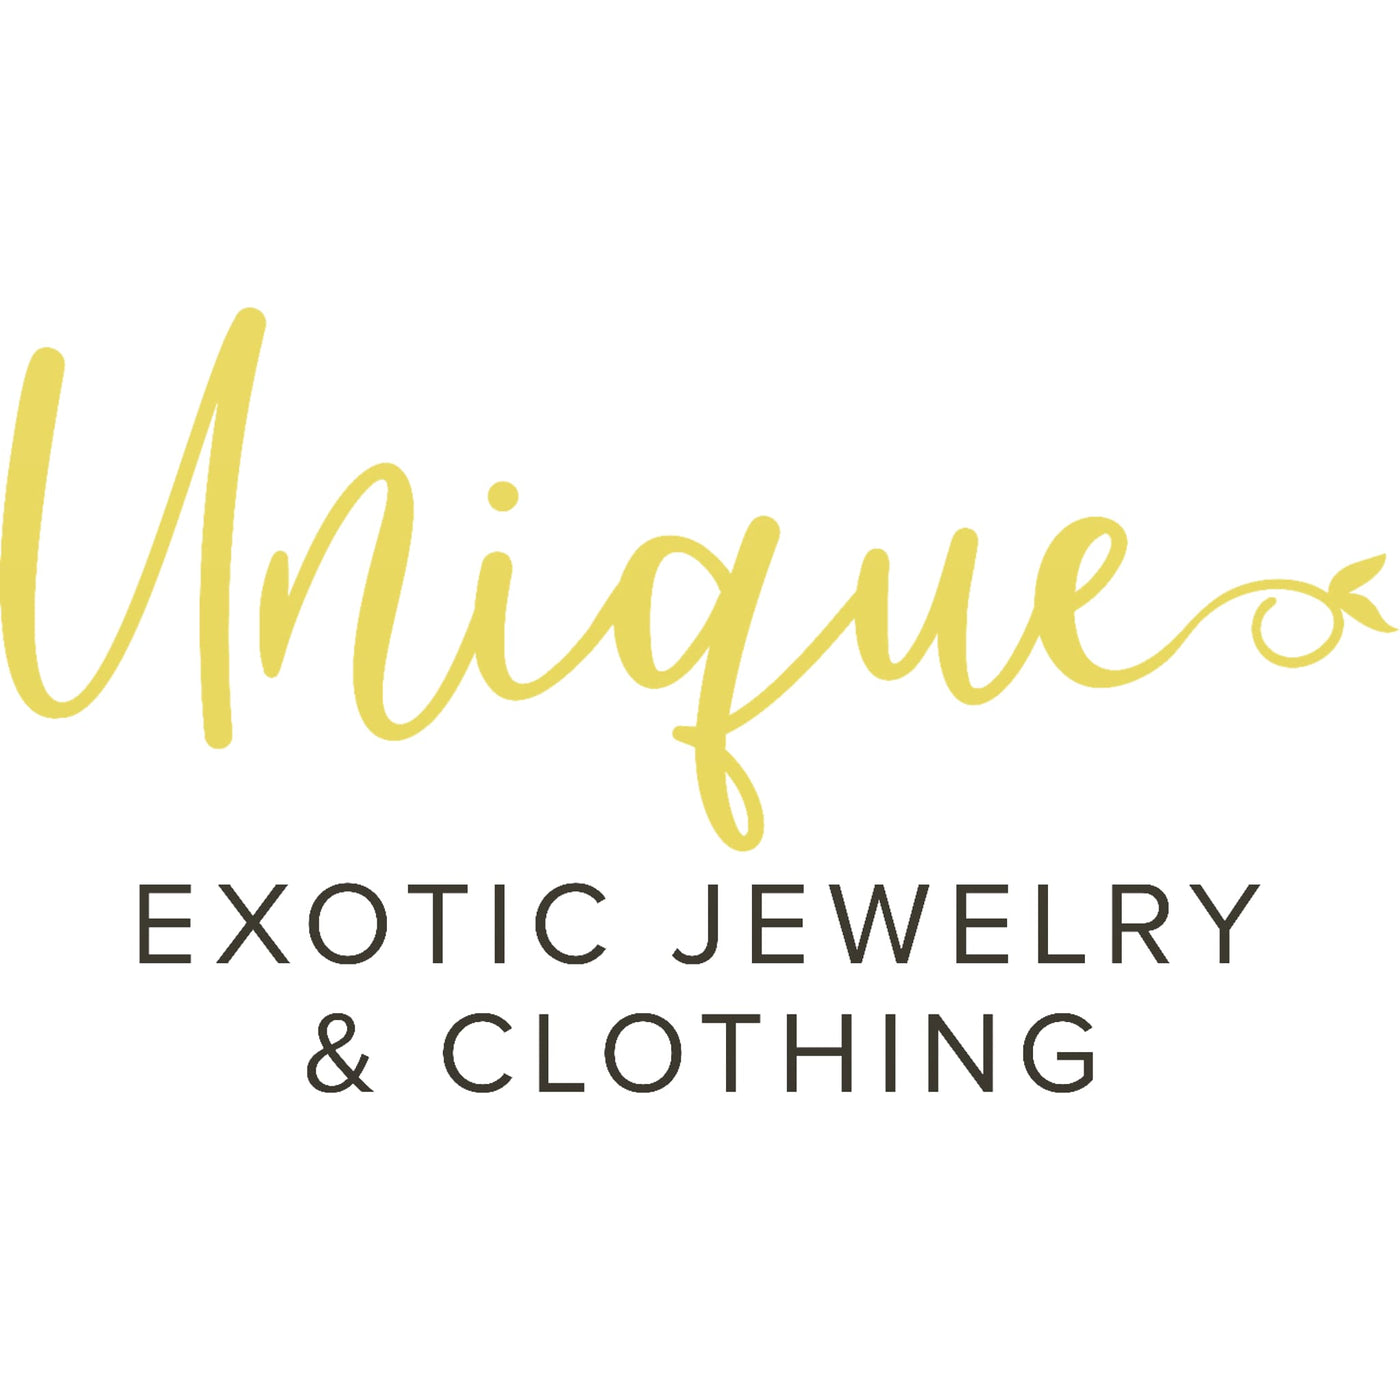 Unique Exotic Jewelry and Clothing